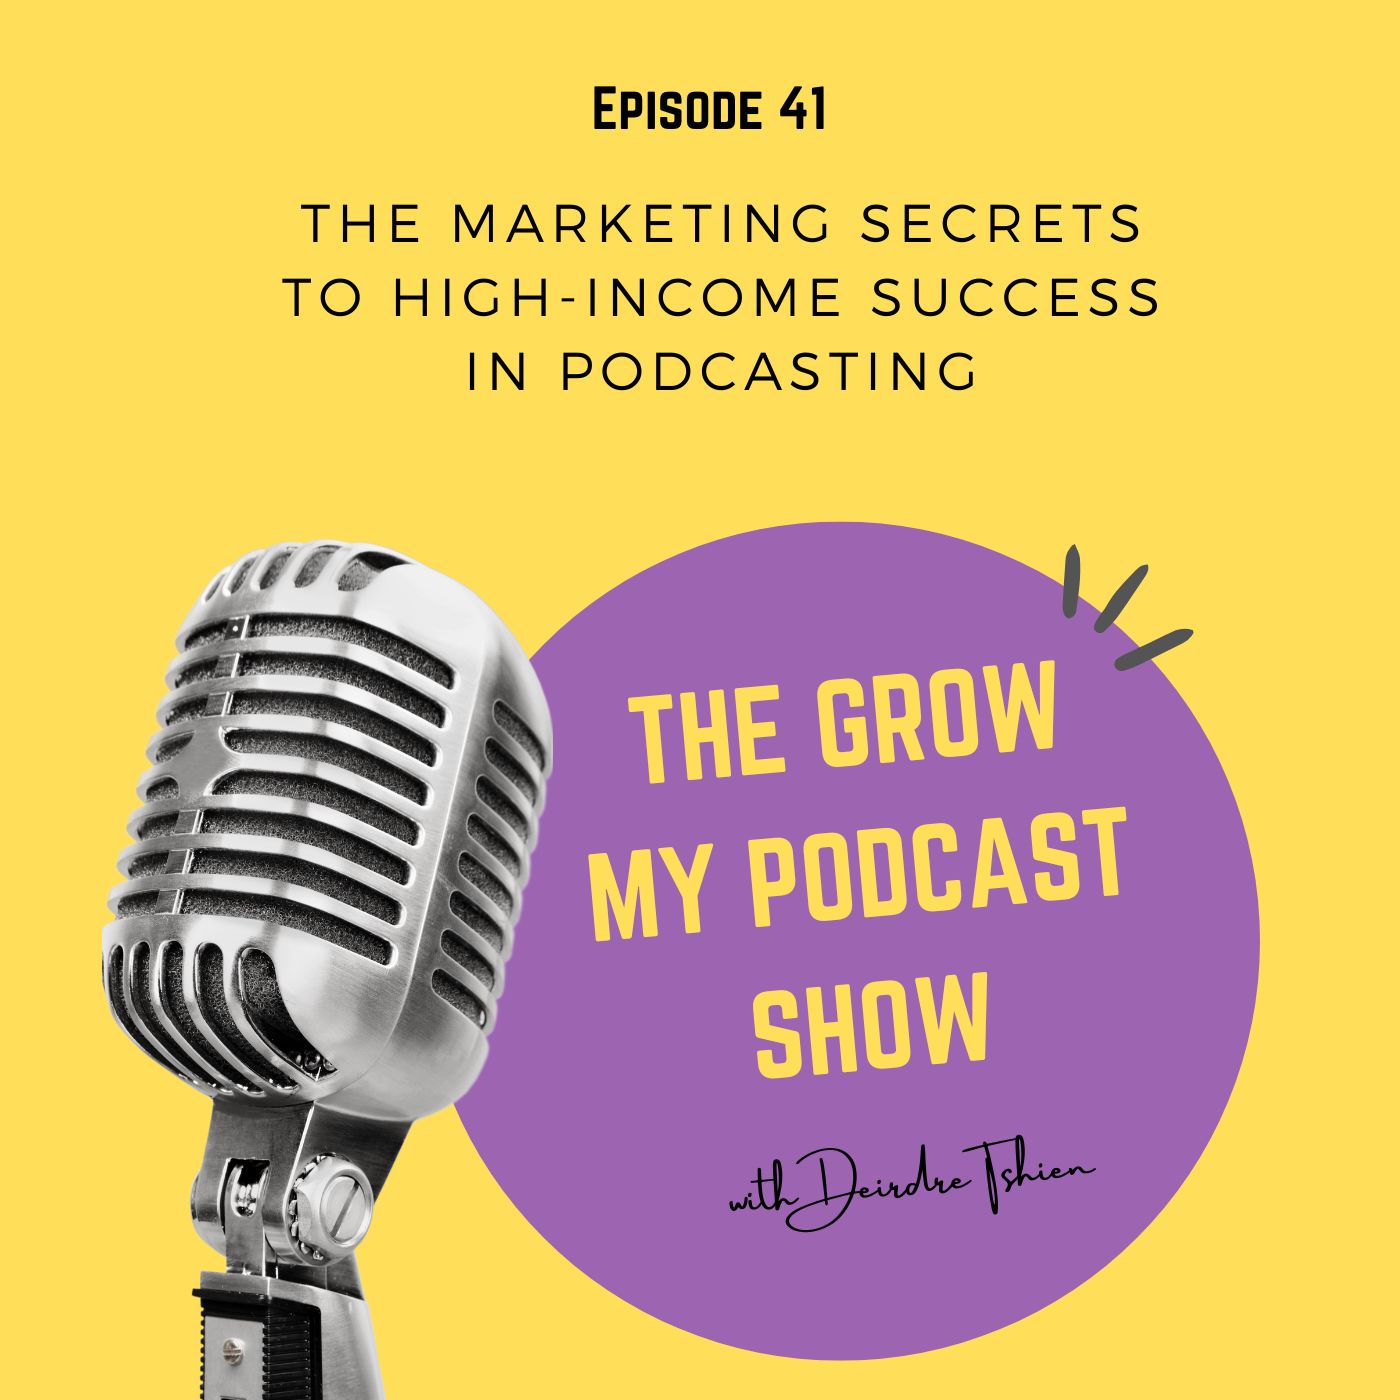 41. The Marketing Secrets to High-Income Success in Podcasting Image